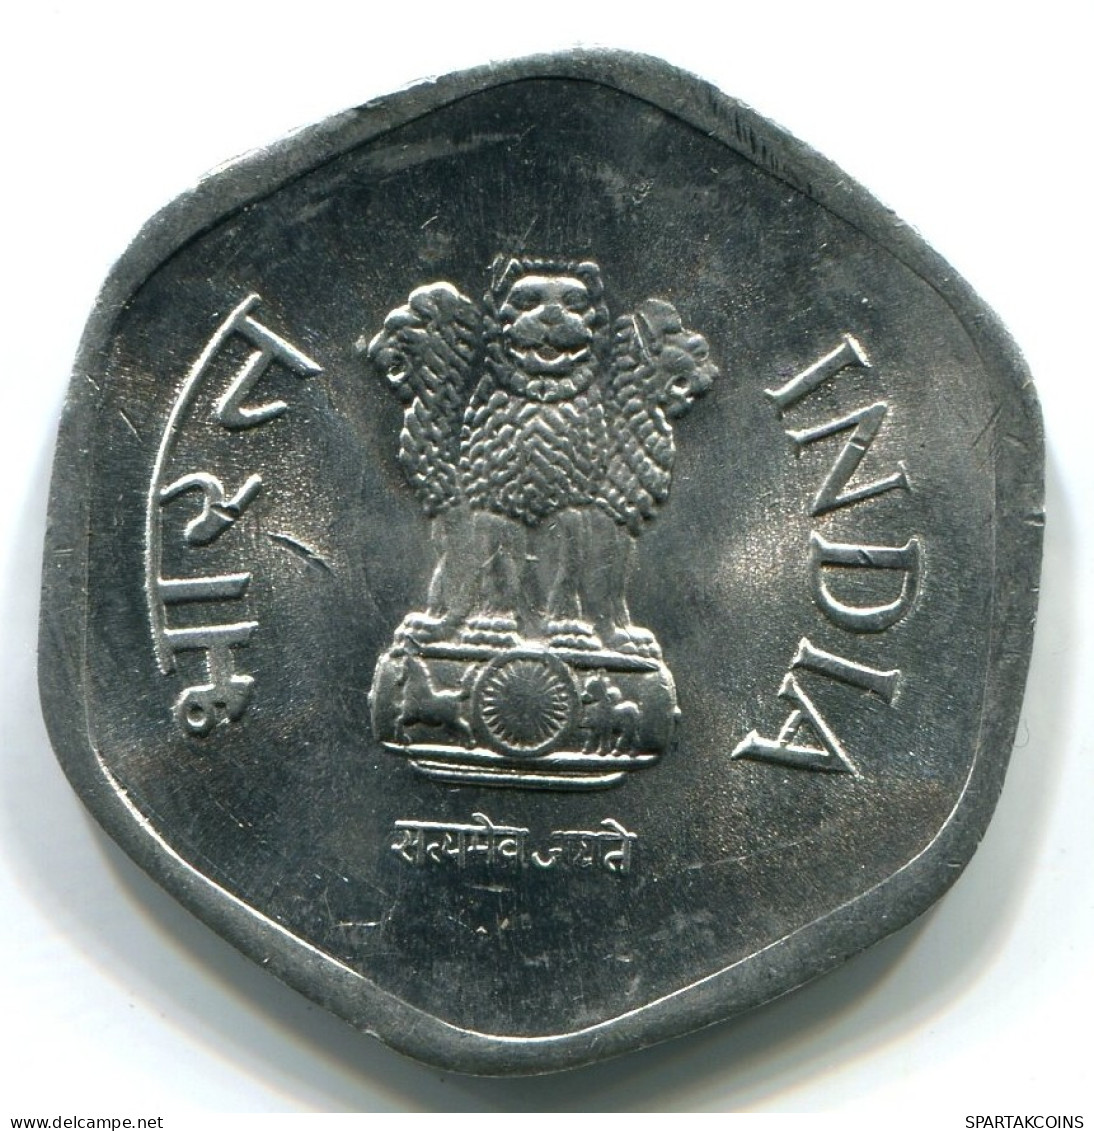 20 PAISE 1988 INDIA UNC Coin #W11176.U.A - Inde